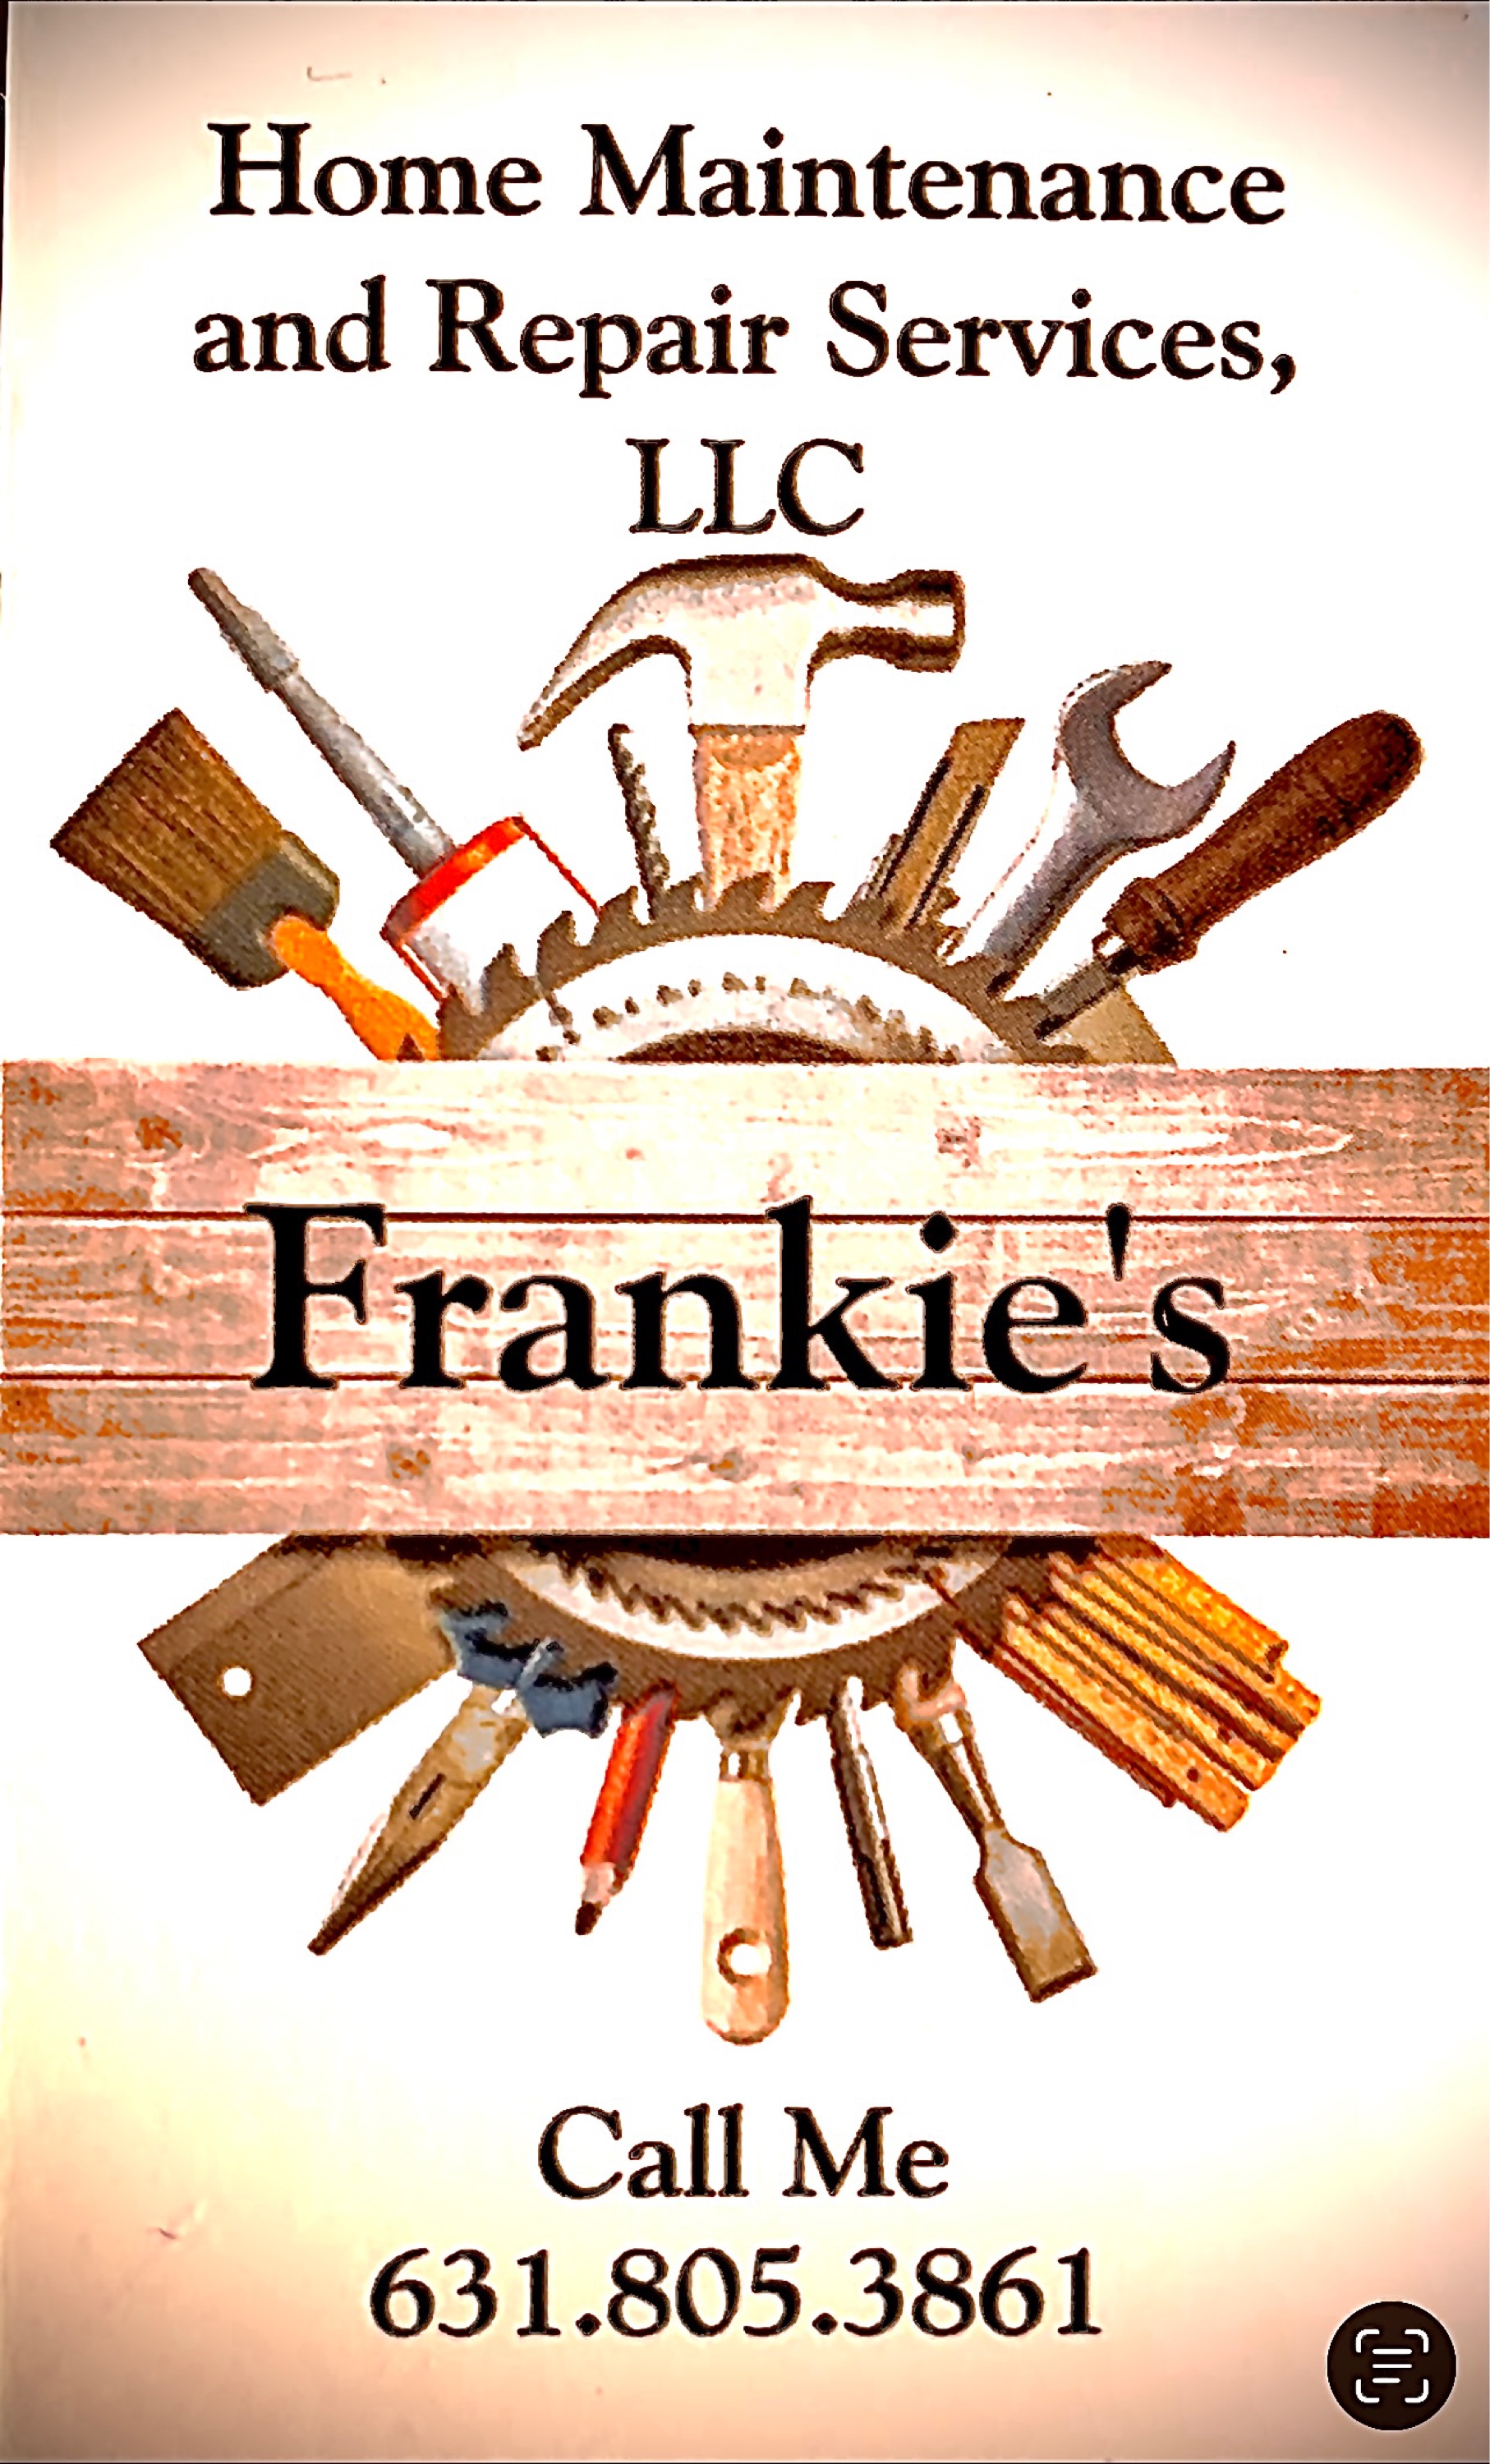 Frankie's Home Maintenance and Repair Services Logo